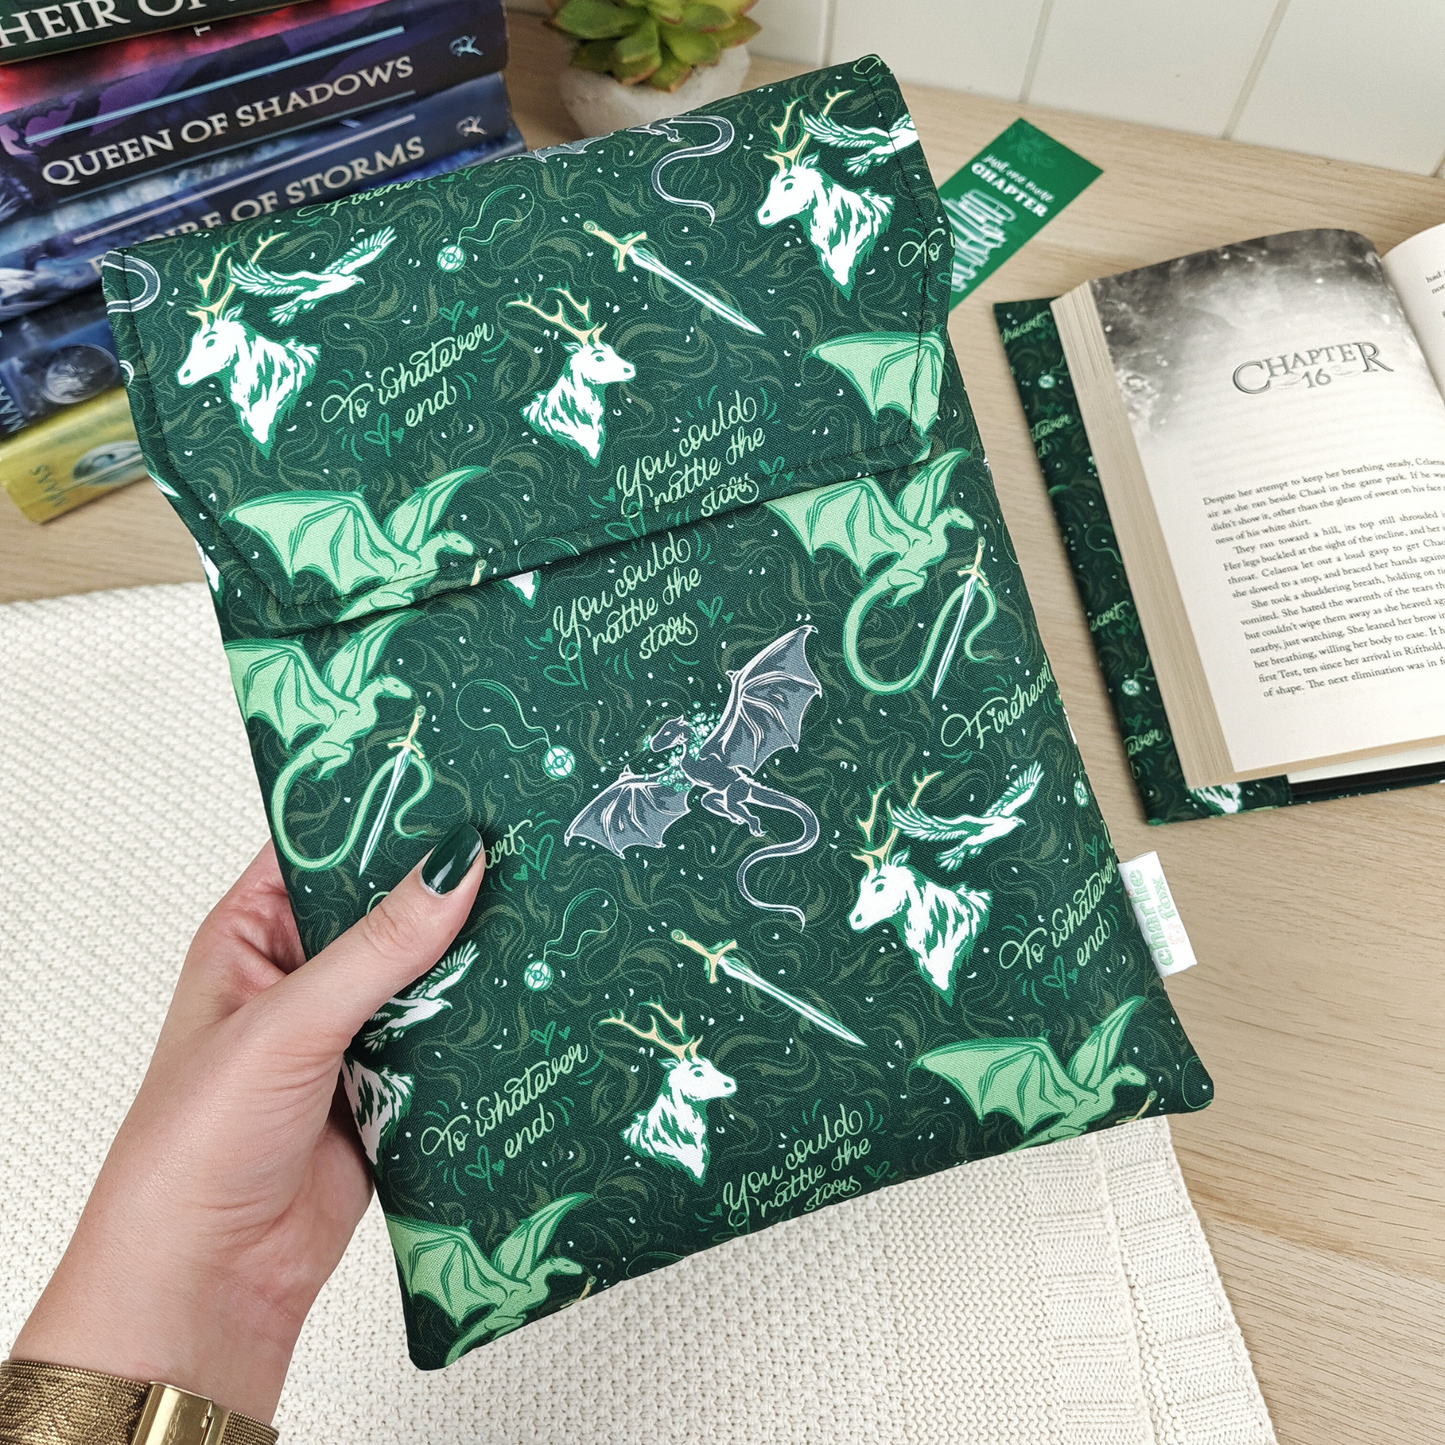 Throne of Glass padded book sleeve